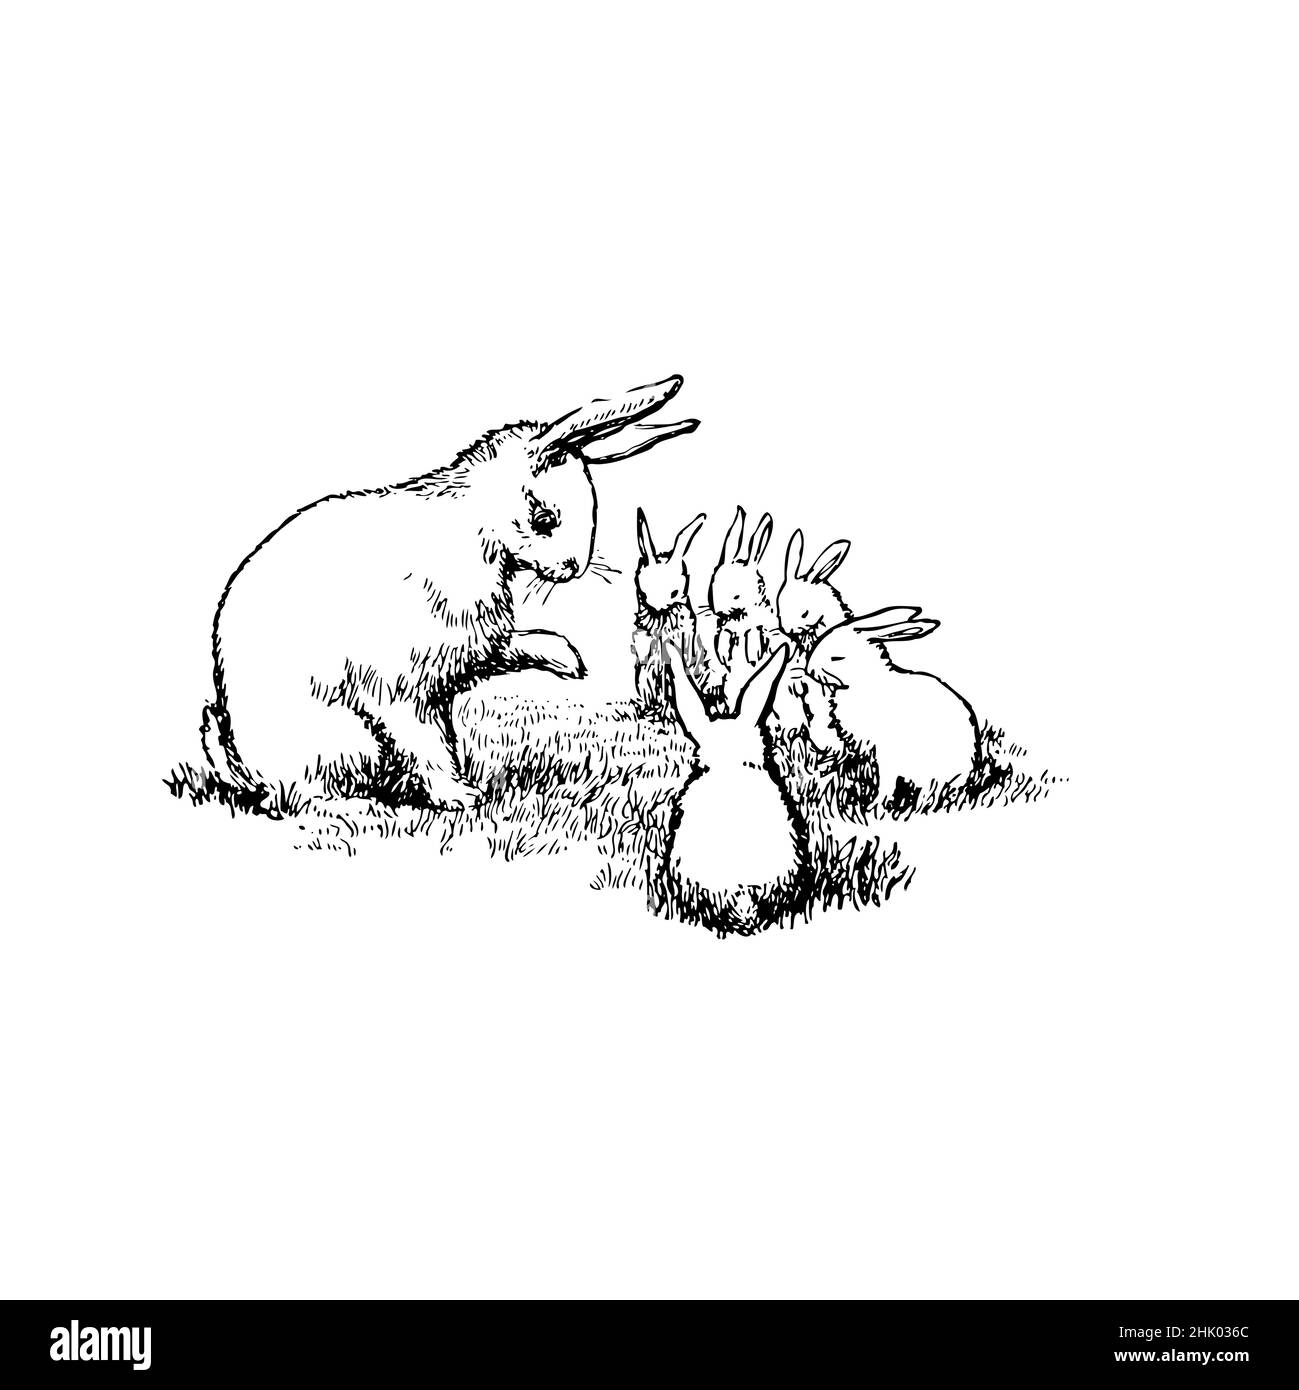 Black and white illustration, bunny rabbit with five little rabbits. Mother looking at the 5 little bunnies, possibly teaching them. Stock Vector